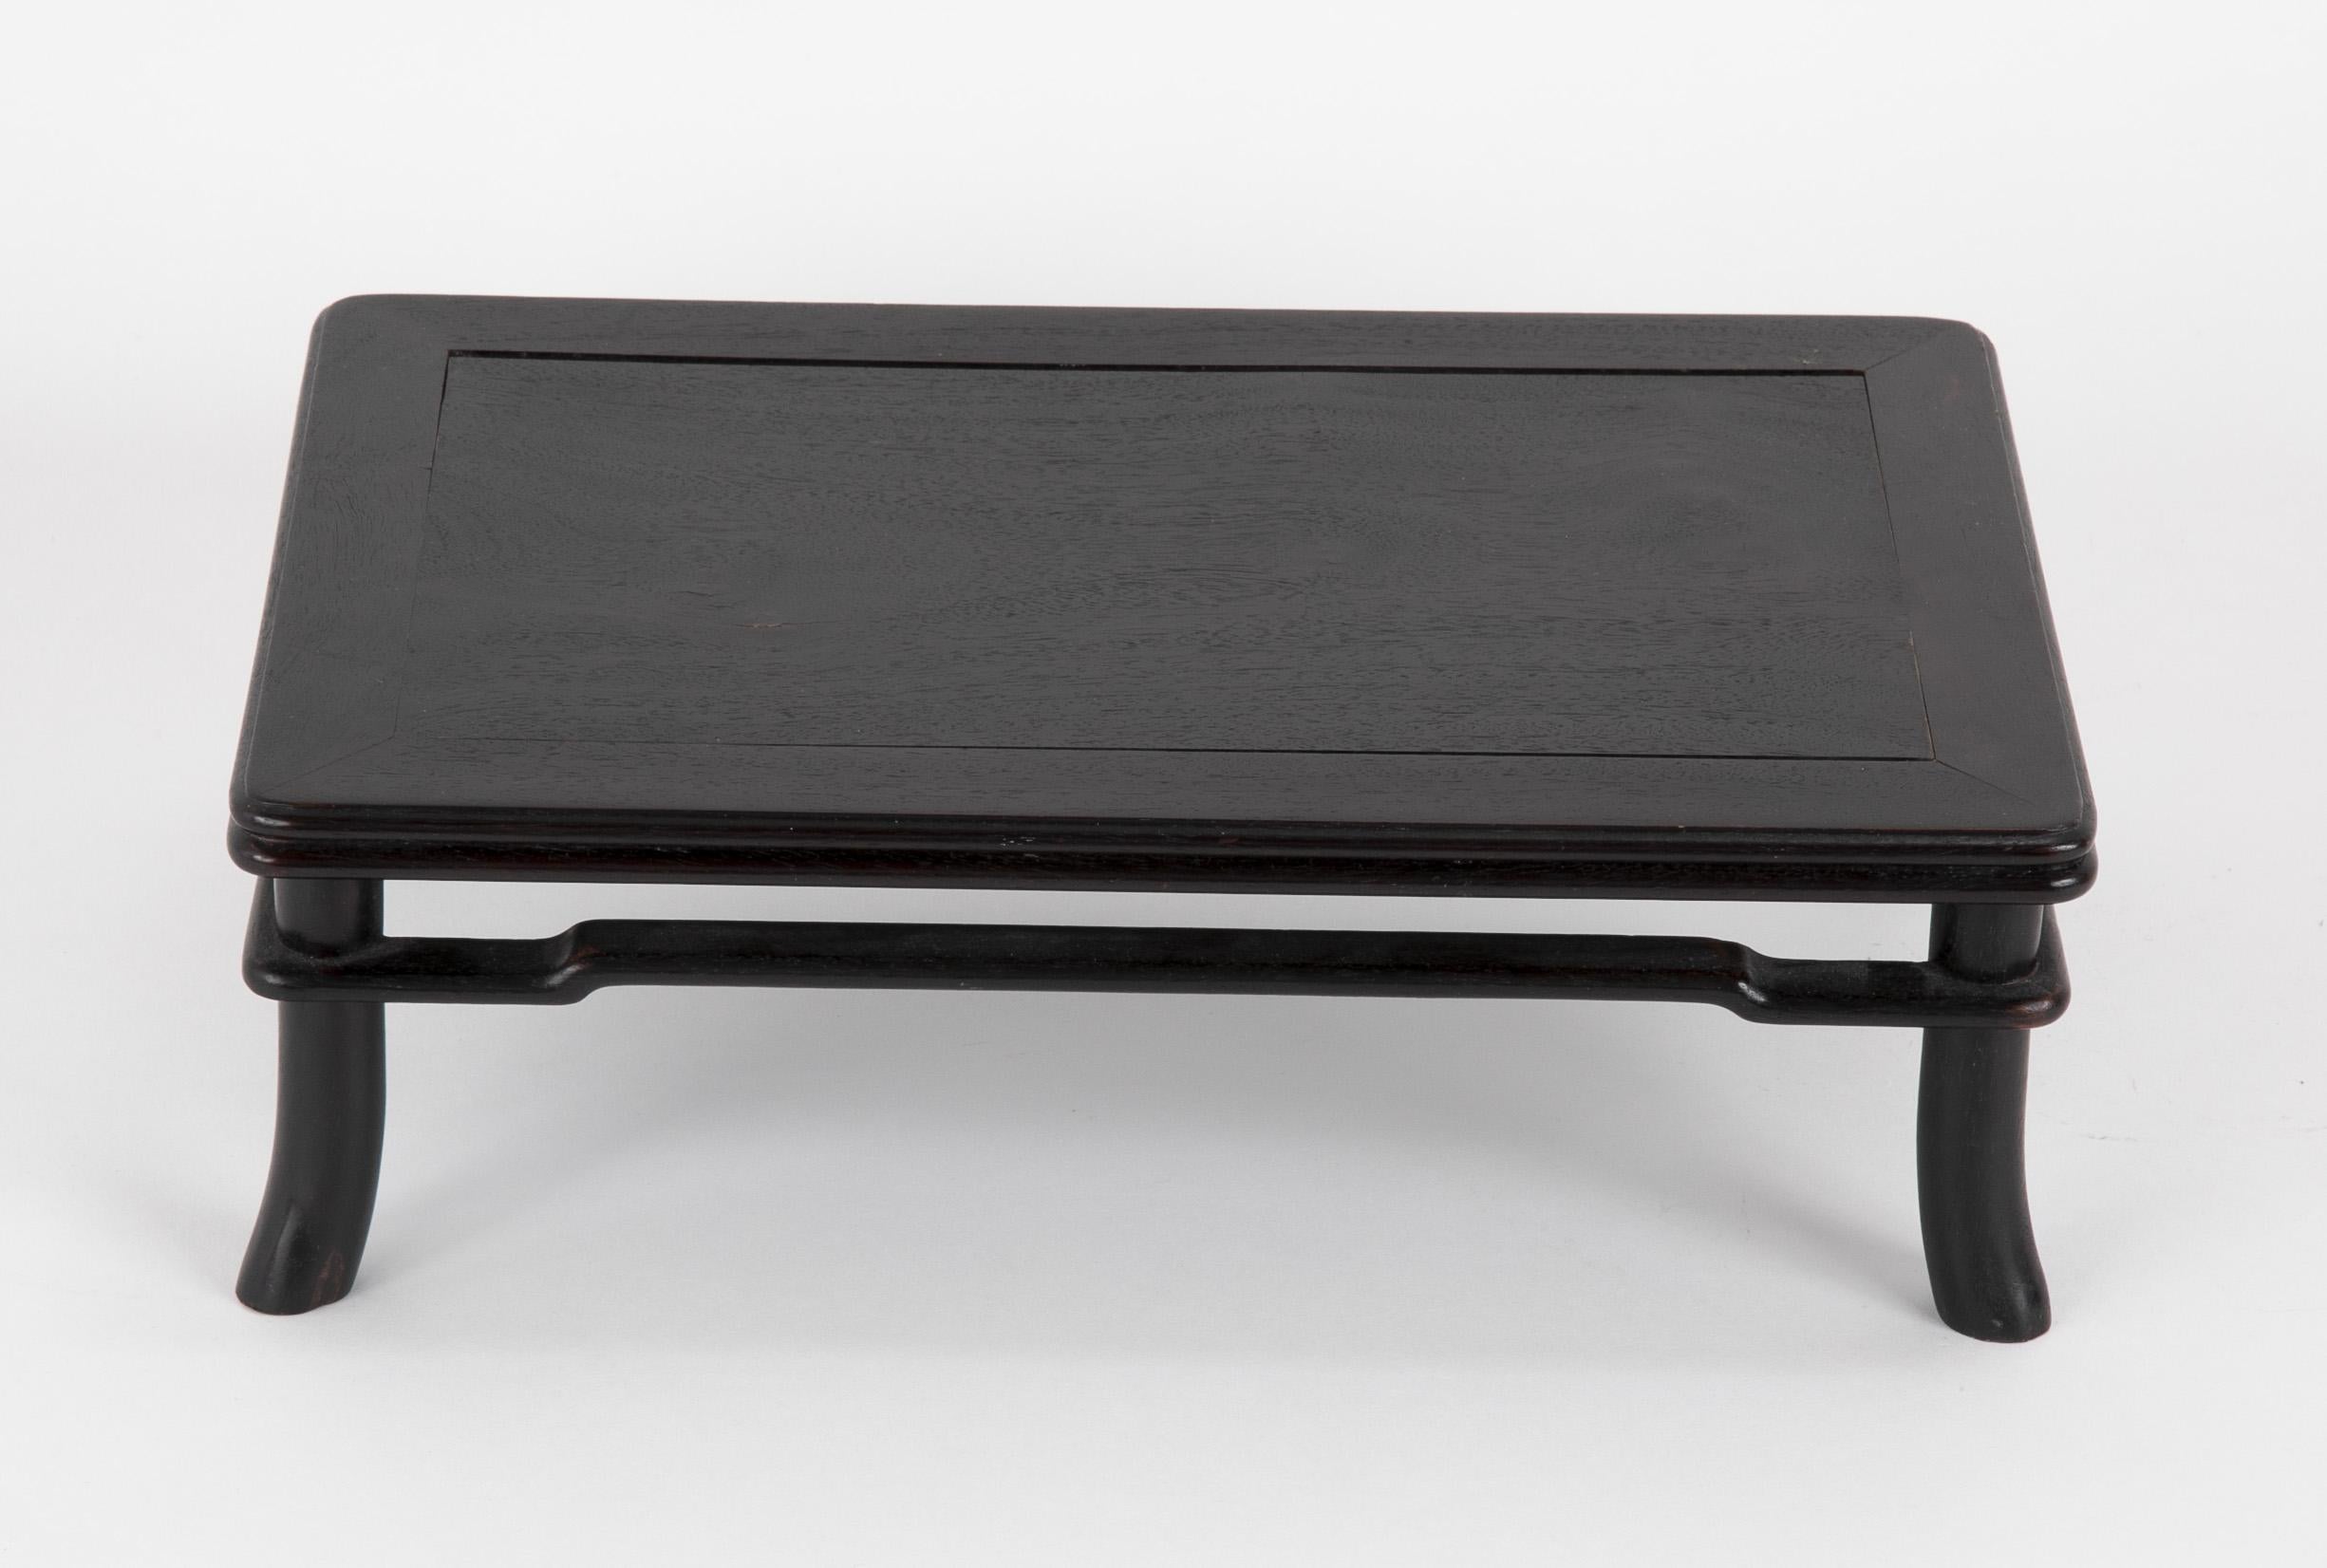 An Zitan wood low table / stand. Late 19th century Japanese Meiji Period. Zitan is an extremely dense wood which sinks in water. It is a member of the rosewood family. The wood is blackish-purple to blackish-red in color, and its fibers are laden